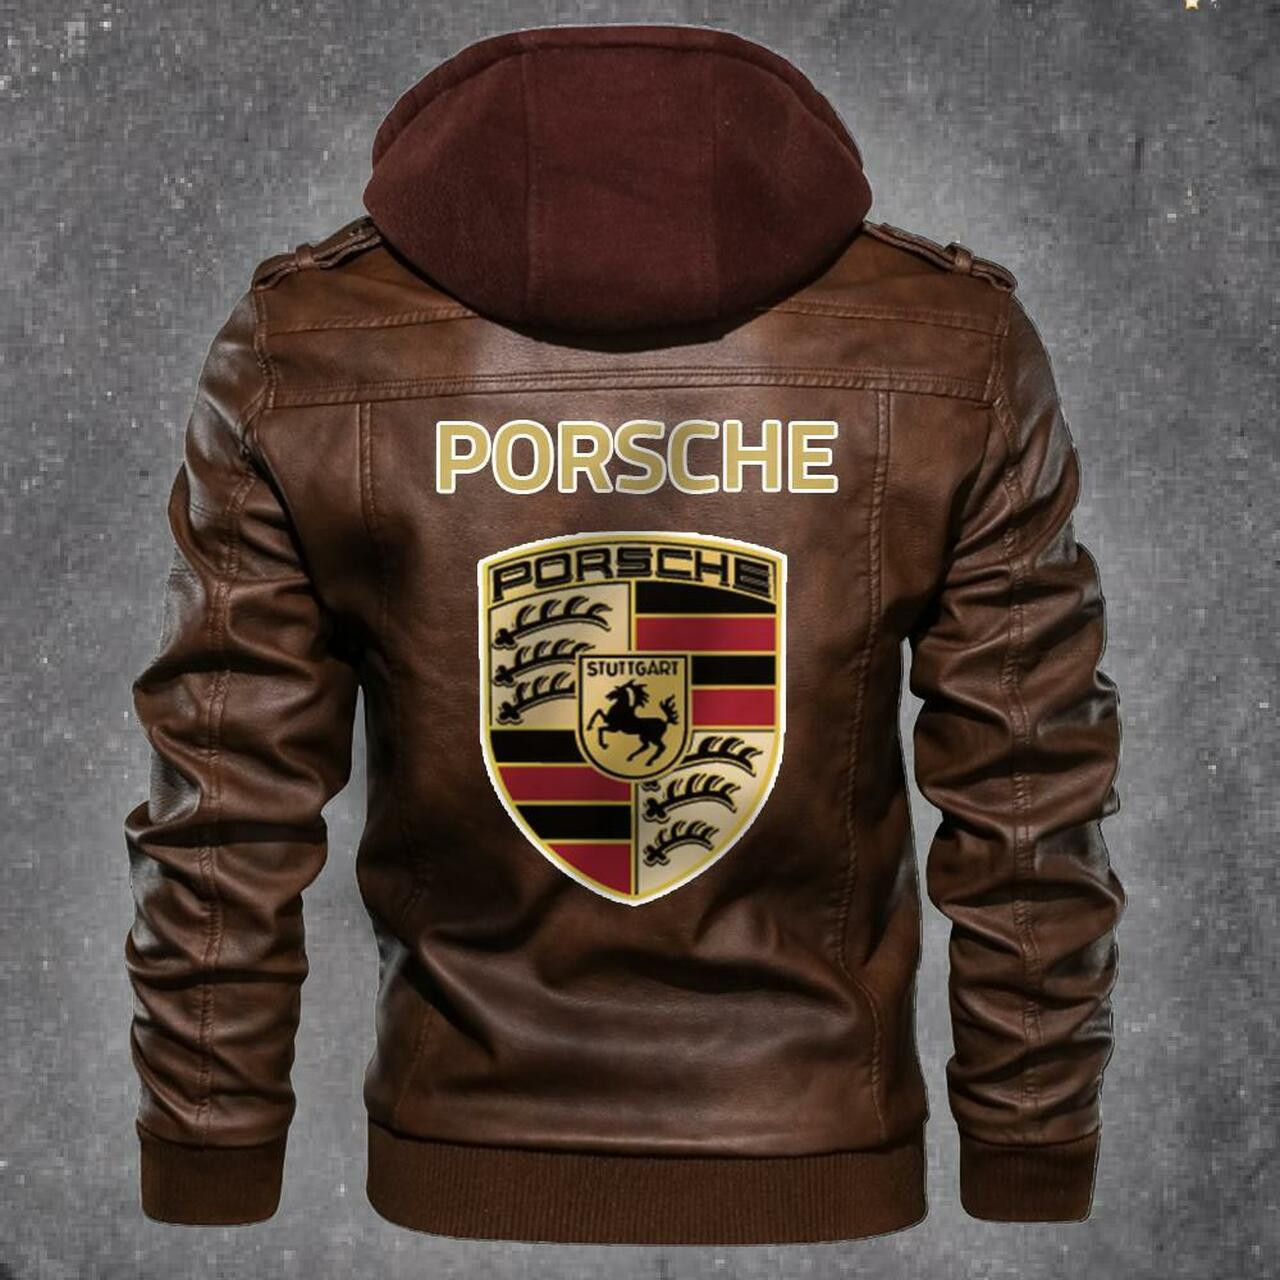 Check out and find the right leather jacket below 433